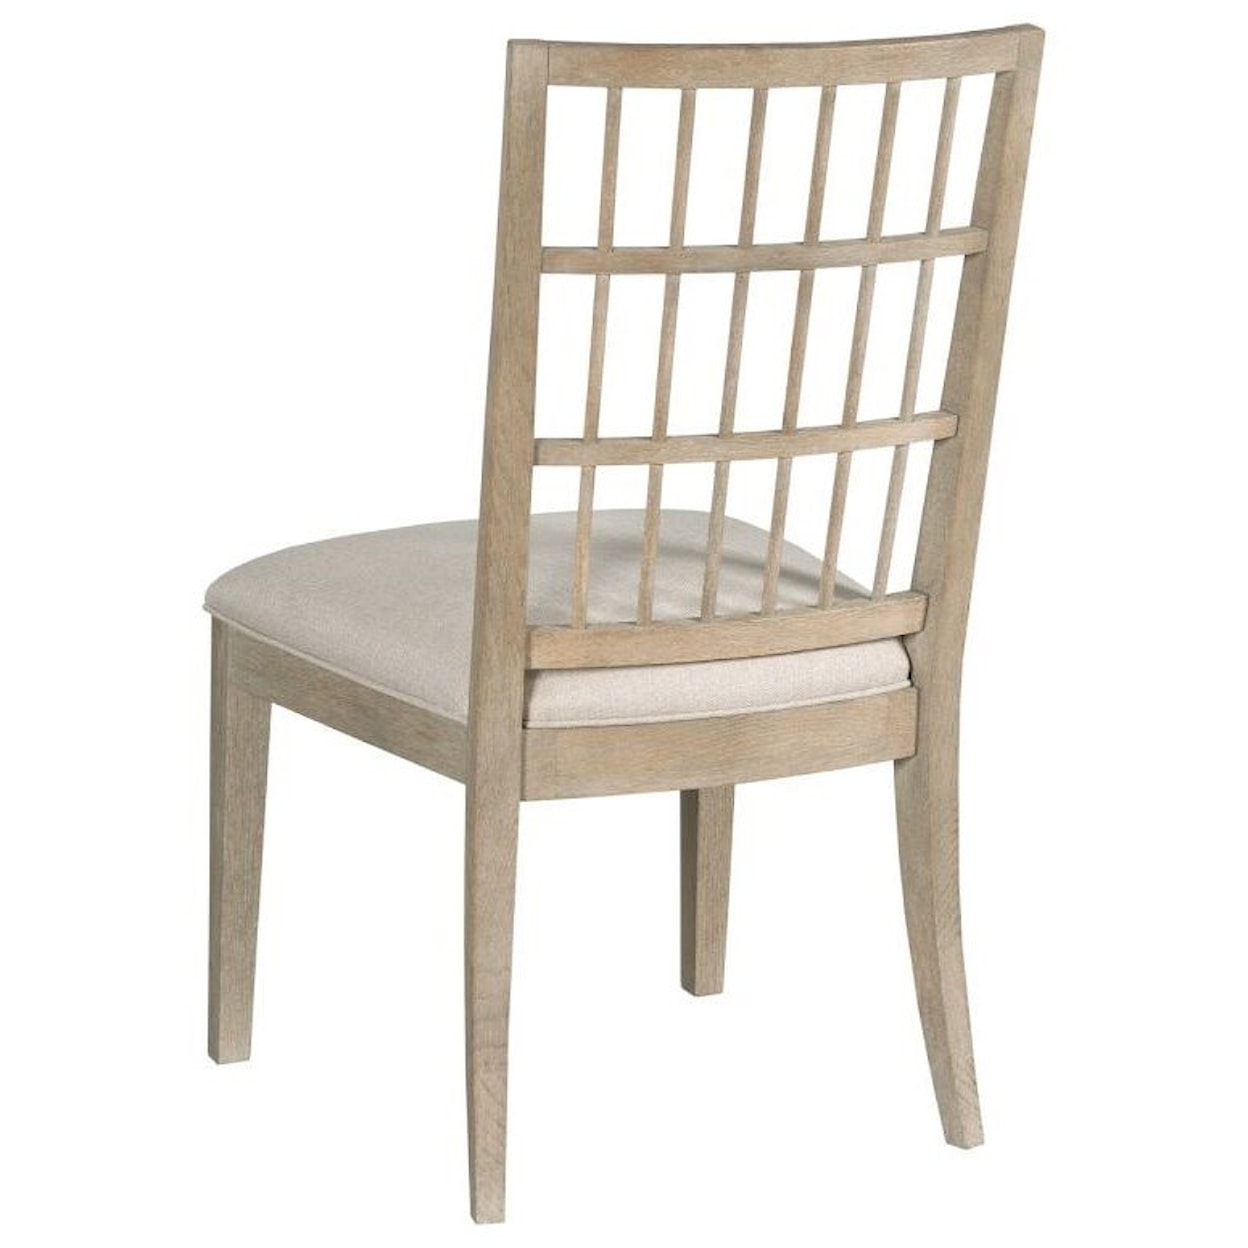 Kincaid Furniture Symmetry Symmetry Upholstered Side Chair